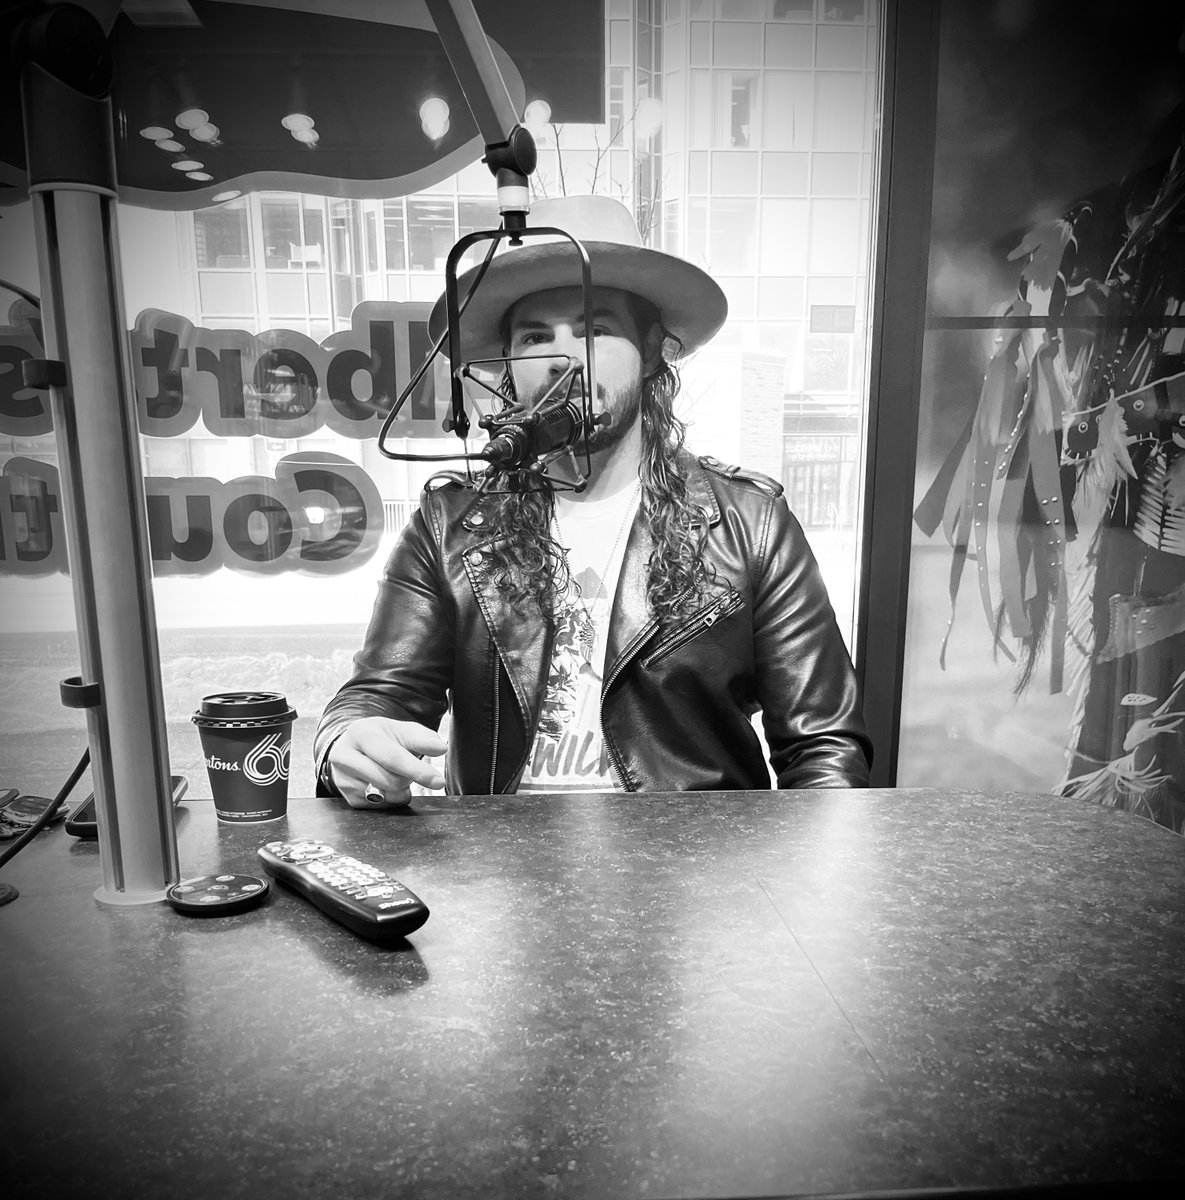 @DevinCooperLive on the Southern Alberta Songwriter Showcase. Every Friday we bring in a new songwriter to share original music! #singersongwriter #countryradio #southern #alberta Go to CJWE.CA to hear his performance!